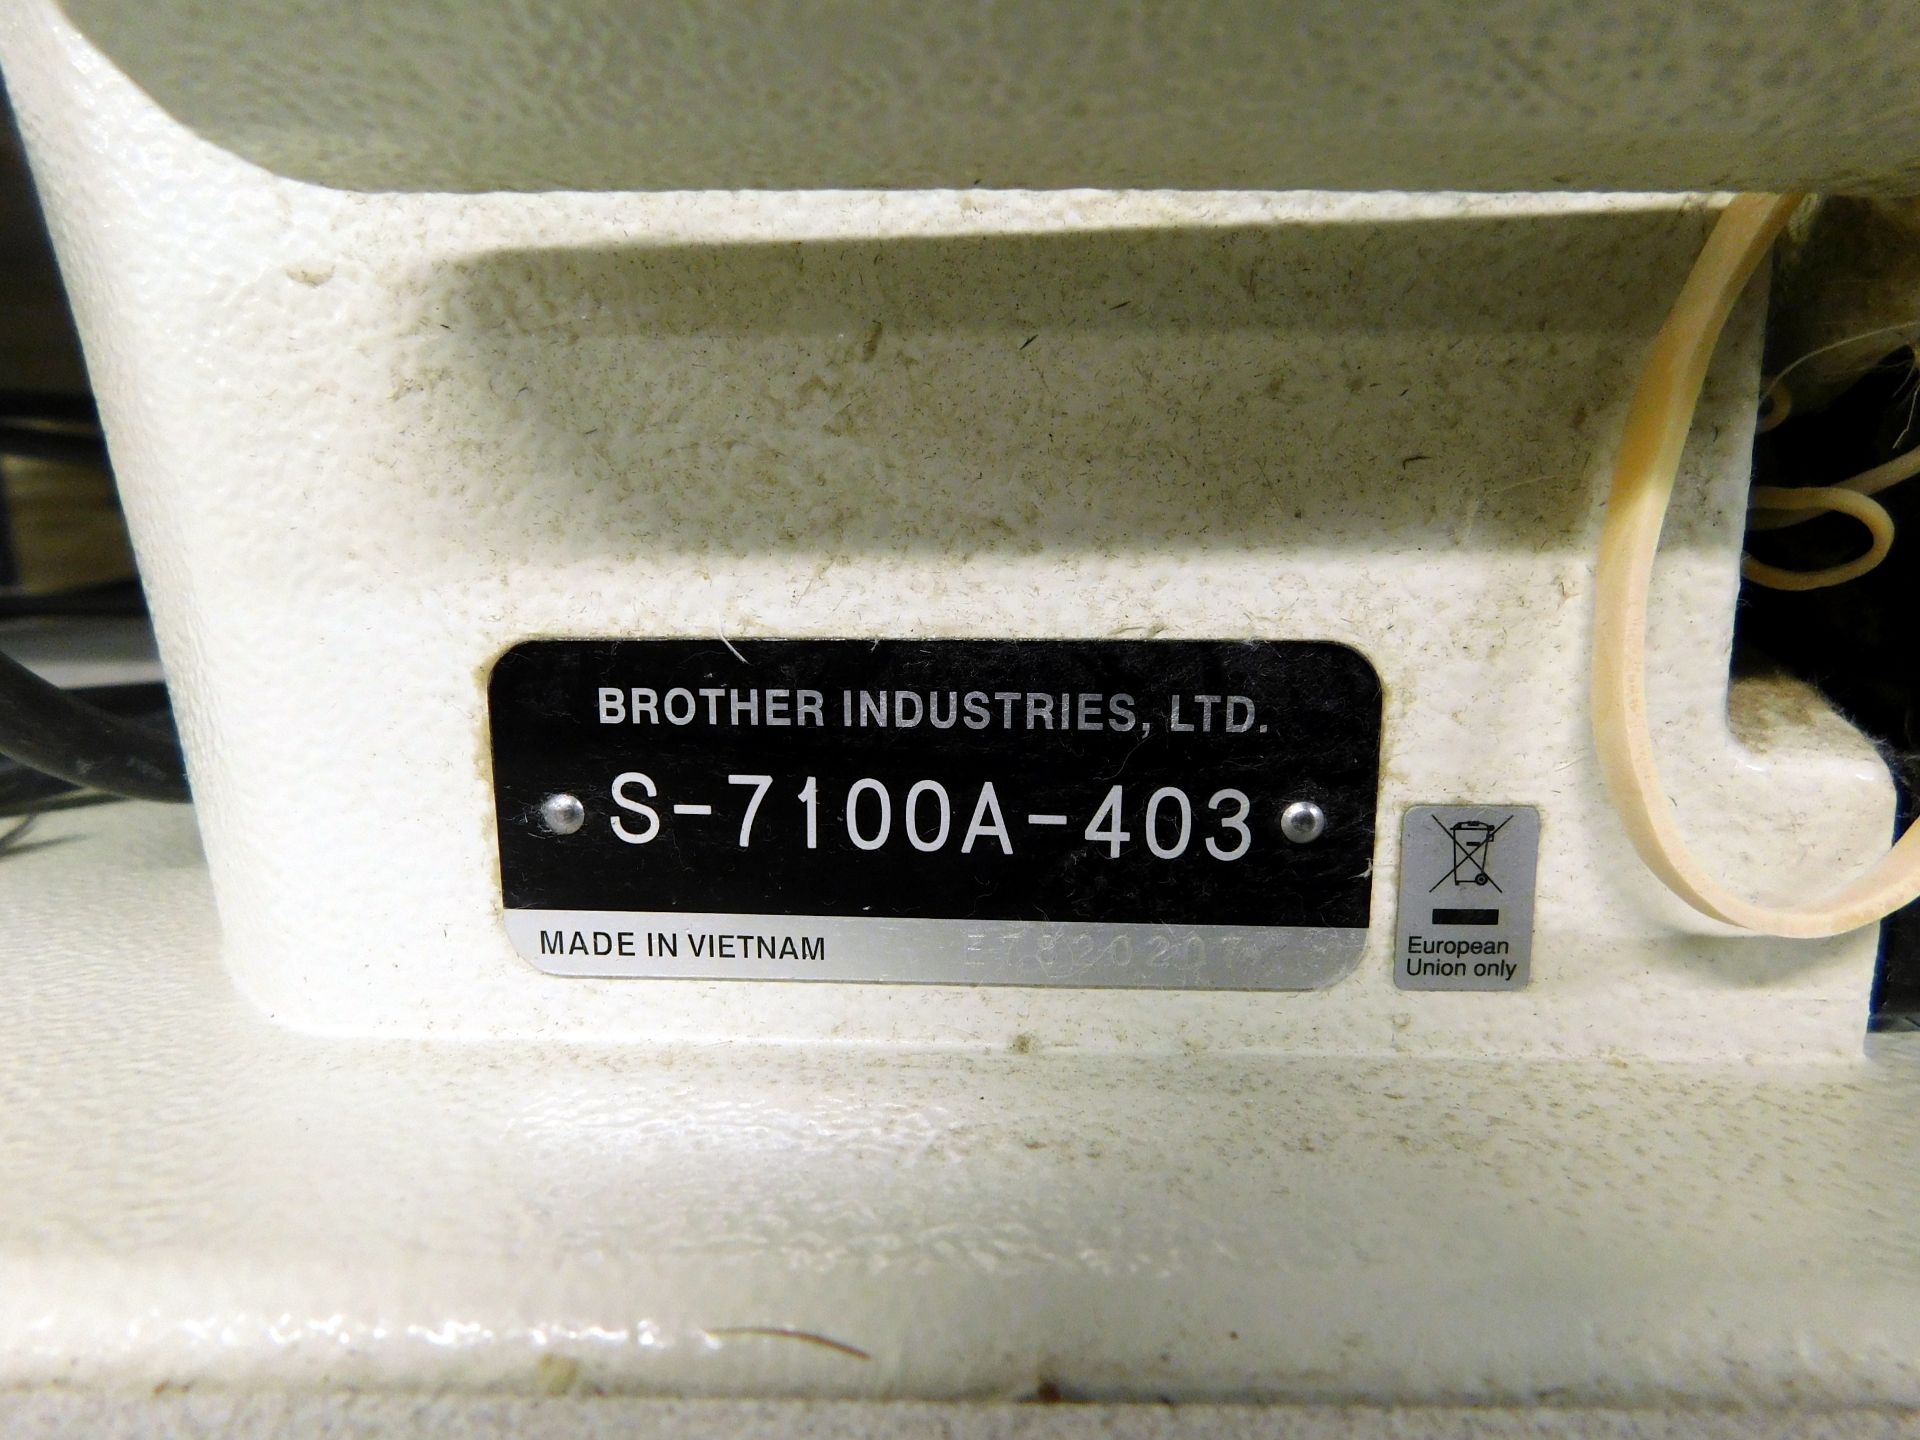 Brother S-7100A-403 Single Needle Lockstitch Machine, Serial Number E7820207 (Location Diss. - Image 3 of 3